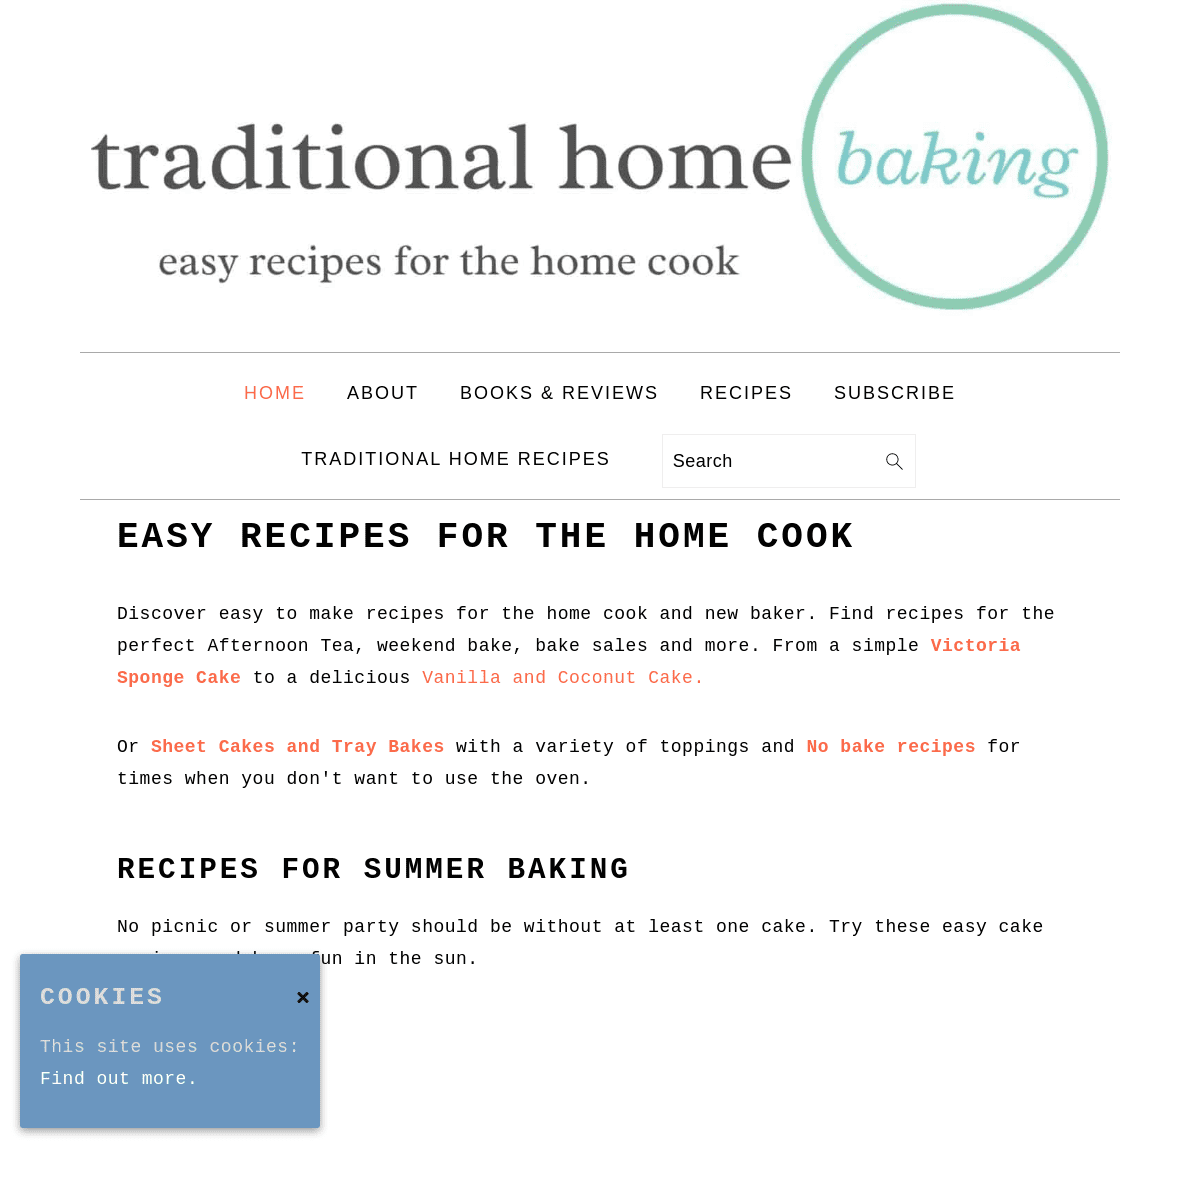 A complete backup of https://traditionalhomebaking.com